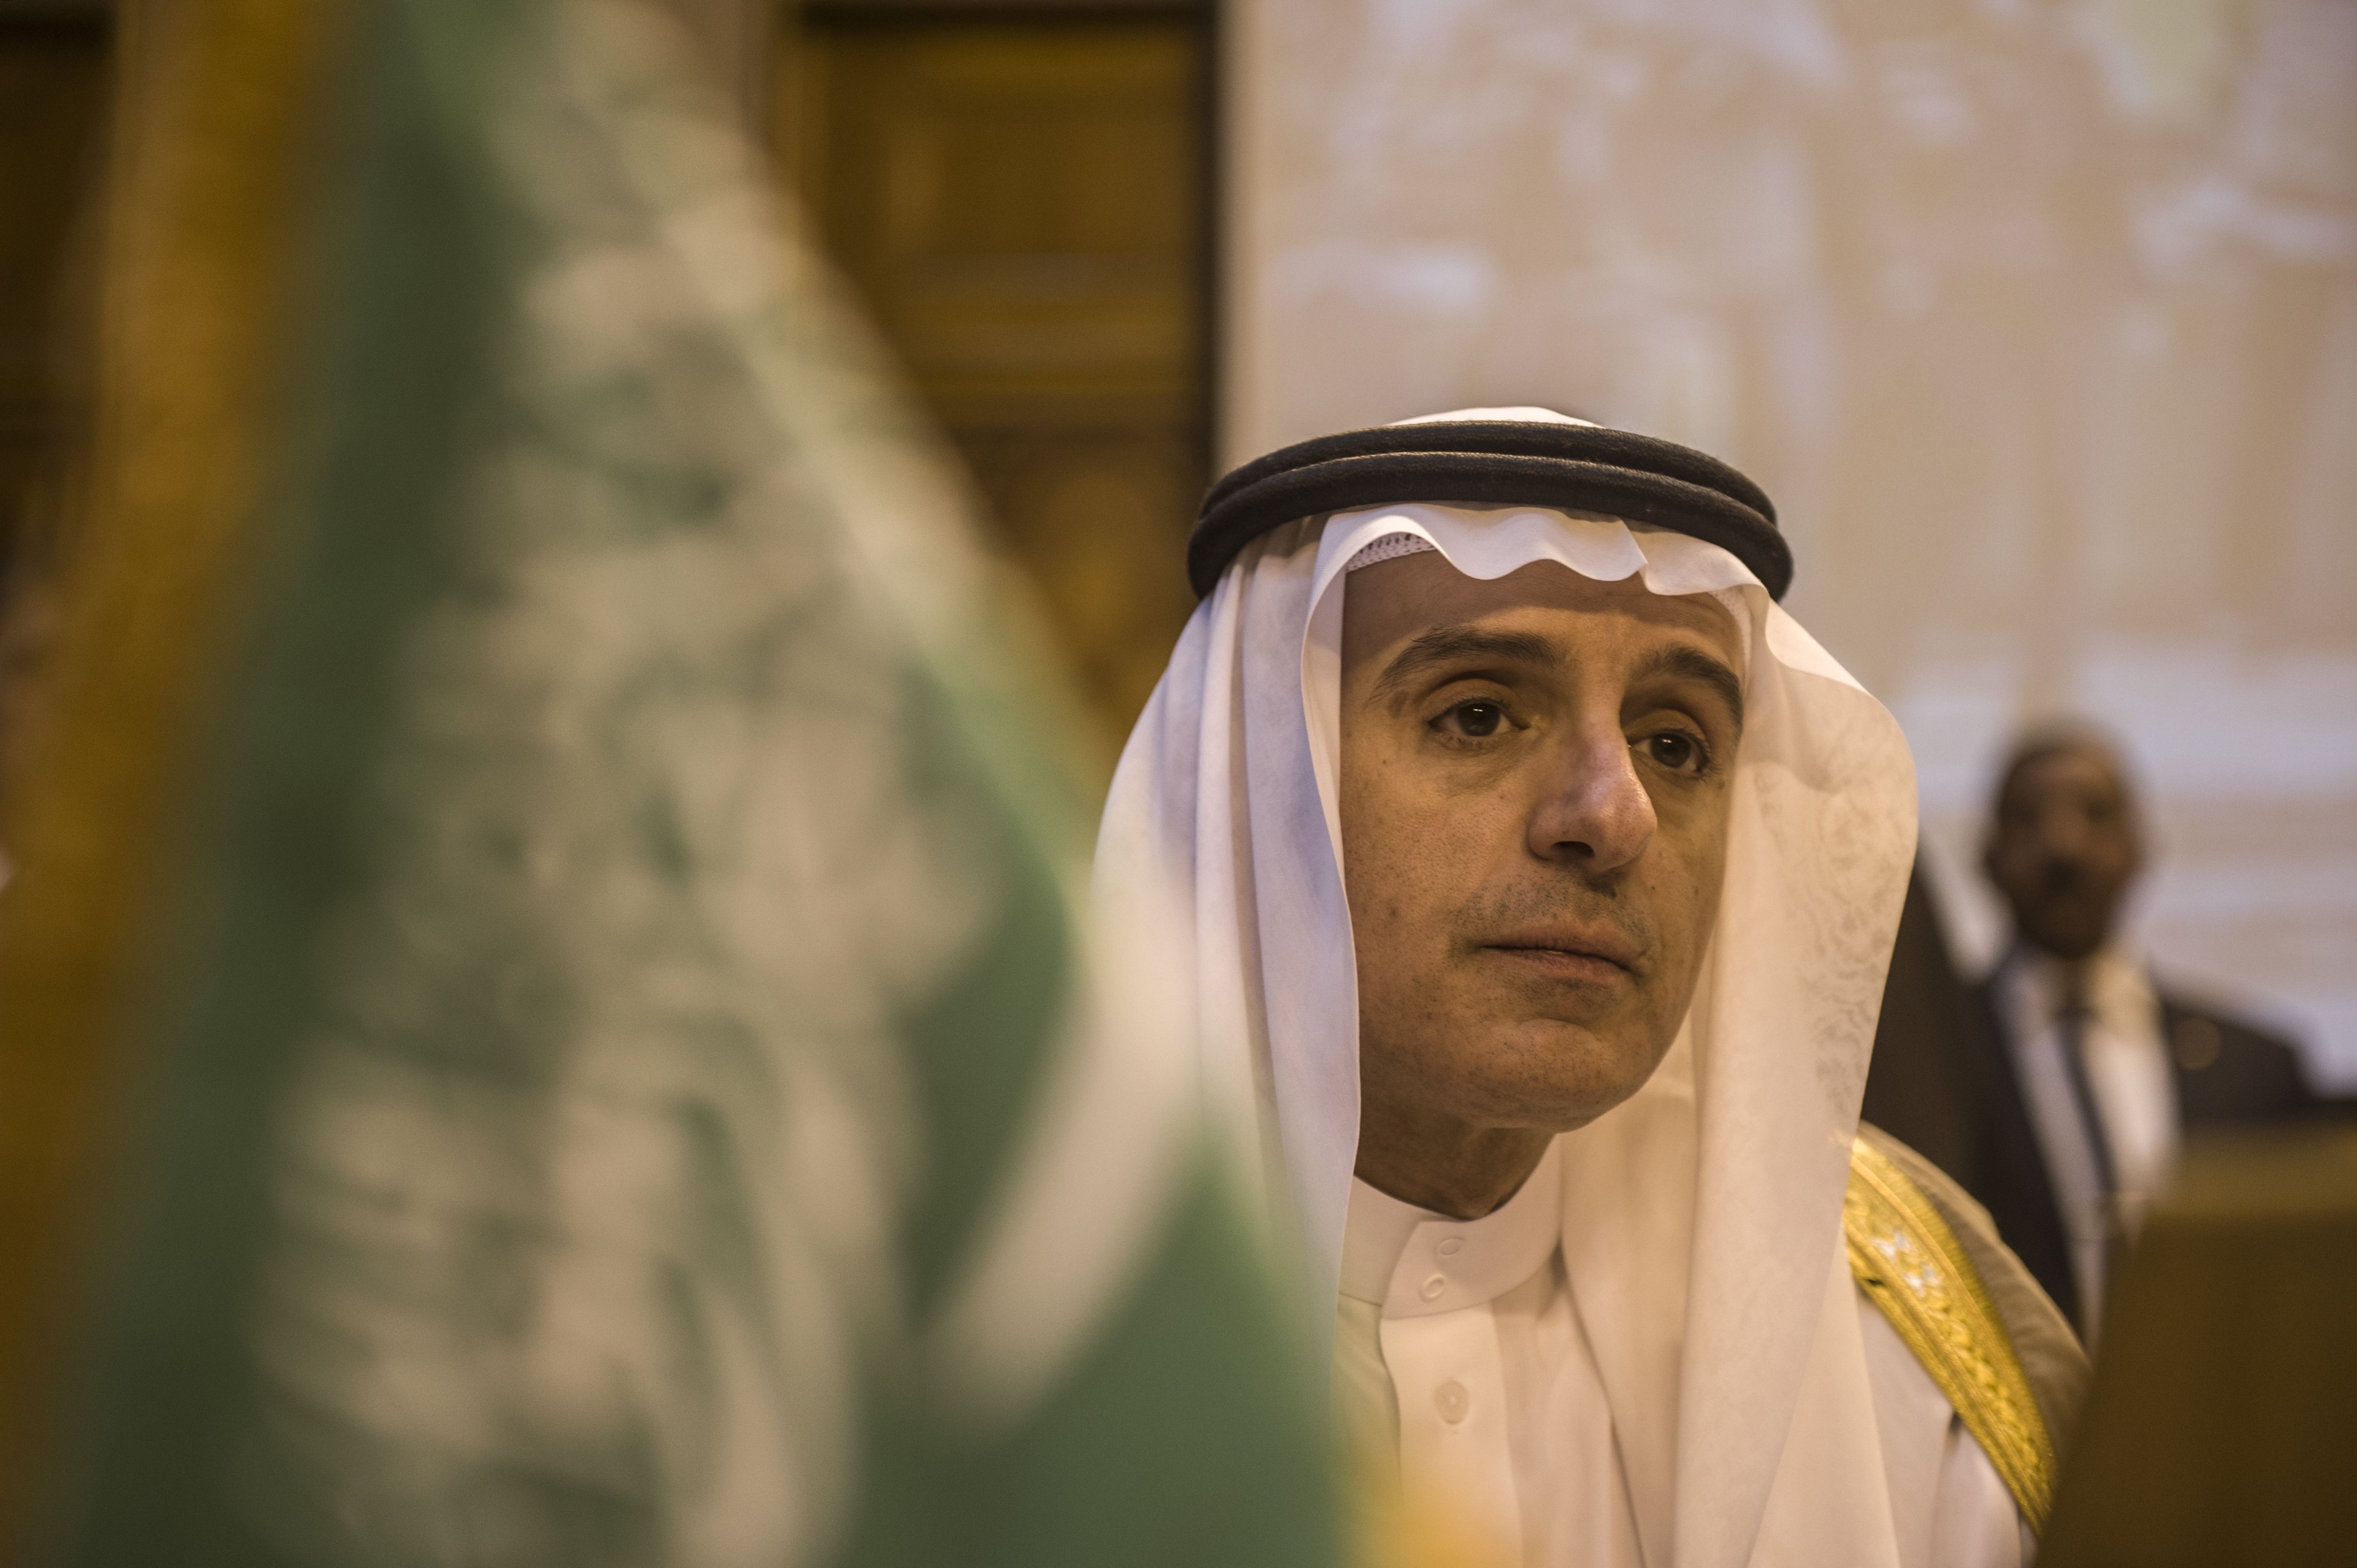 Saudi Minister of Foreign Affairs Adel al-Jubeir at an emergency meeting of Arab foreign ministers in Cairo on Jan. 10, 2016.